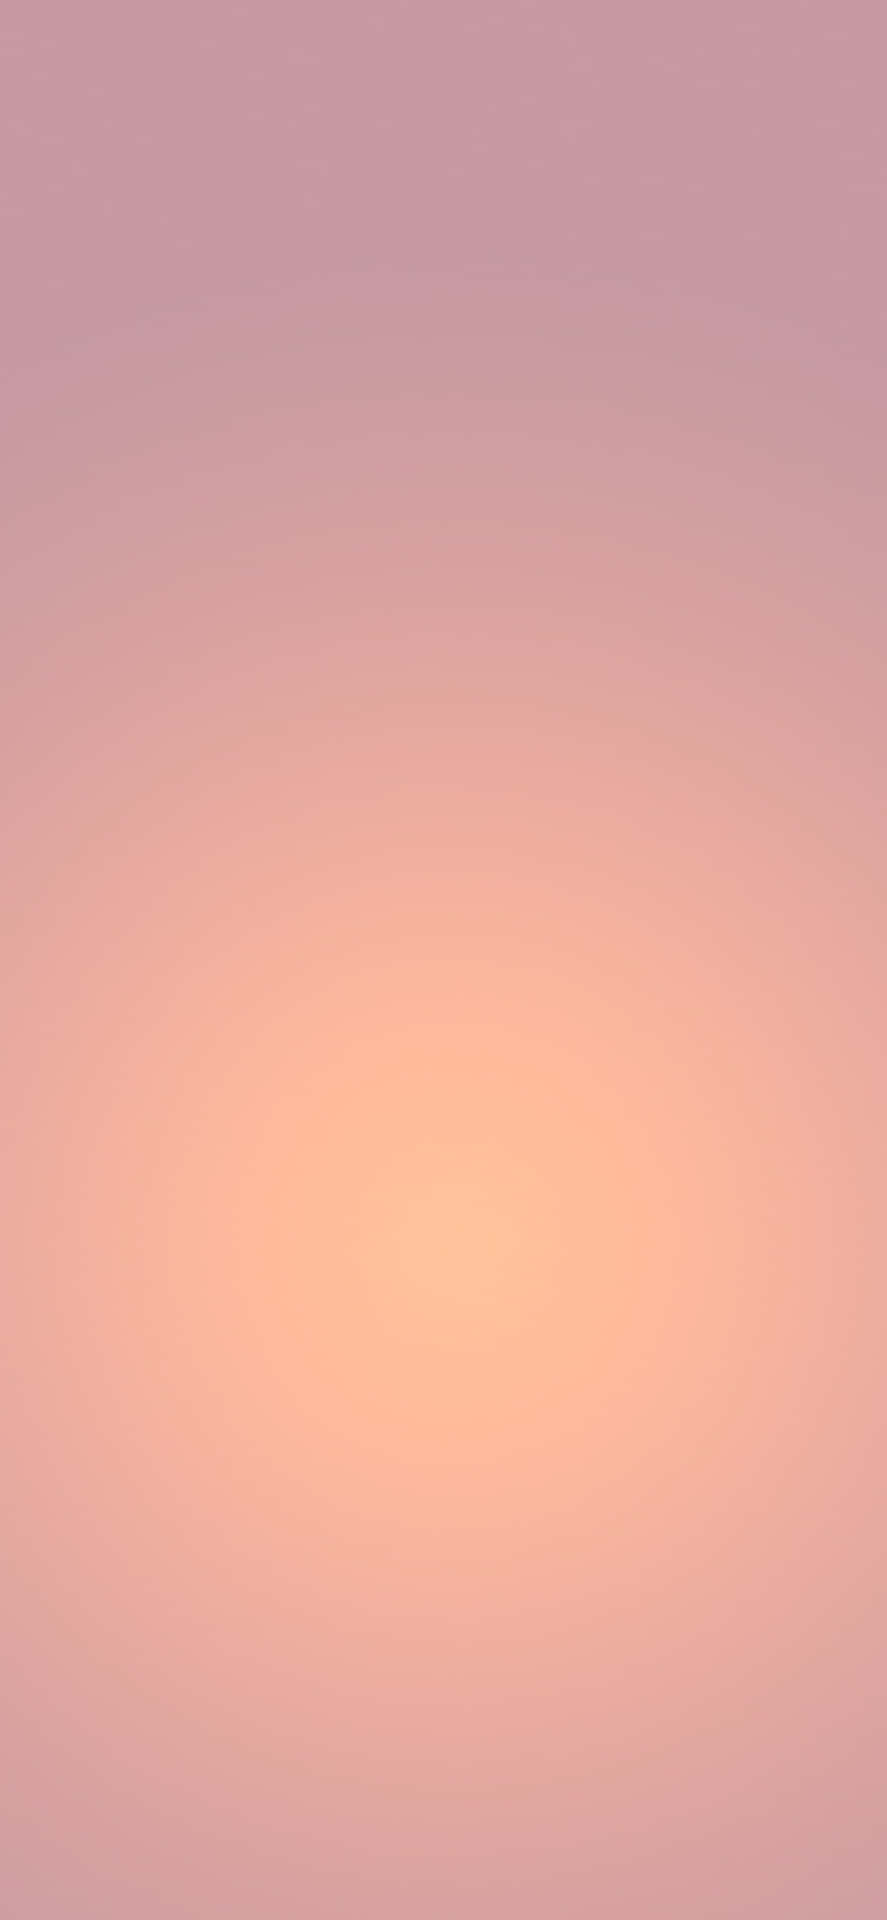 Cool and Colorful Gradient Iphone Wallpaper